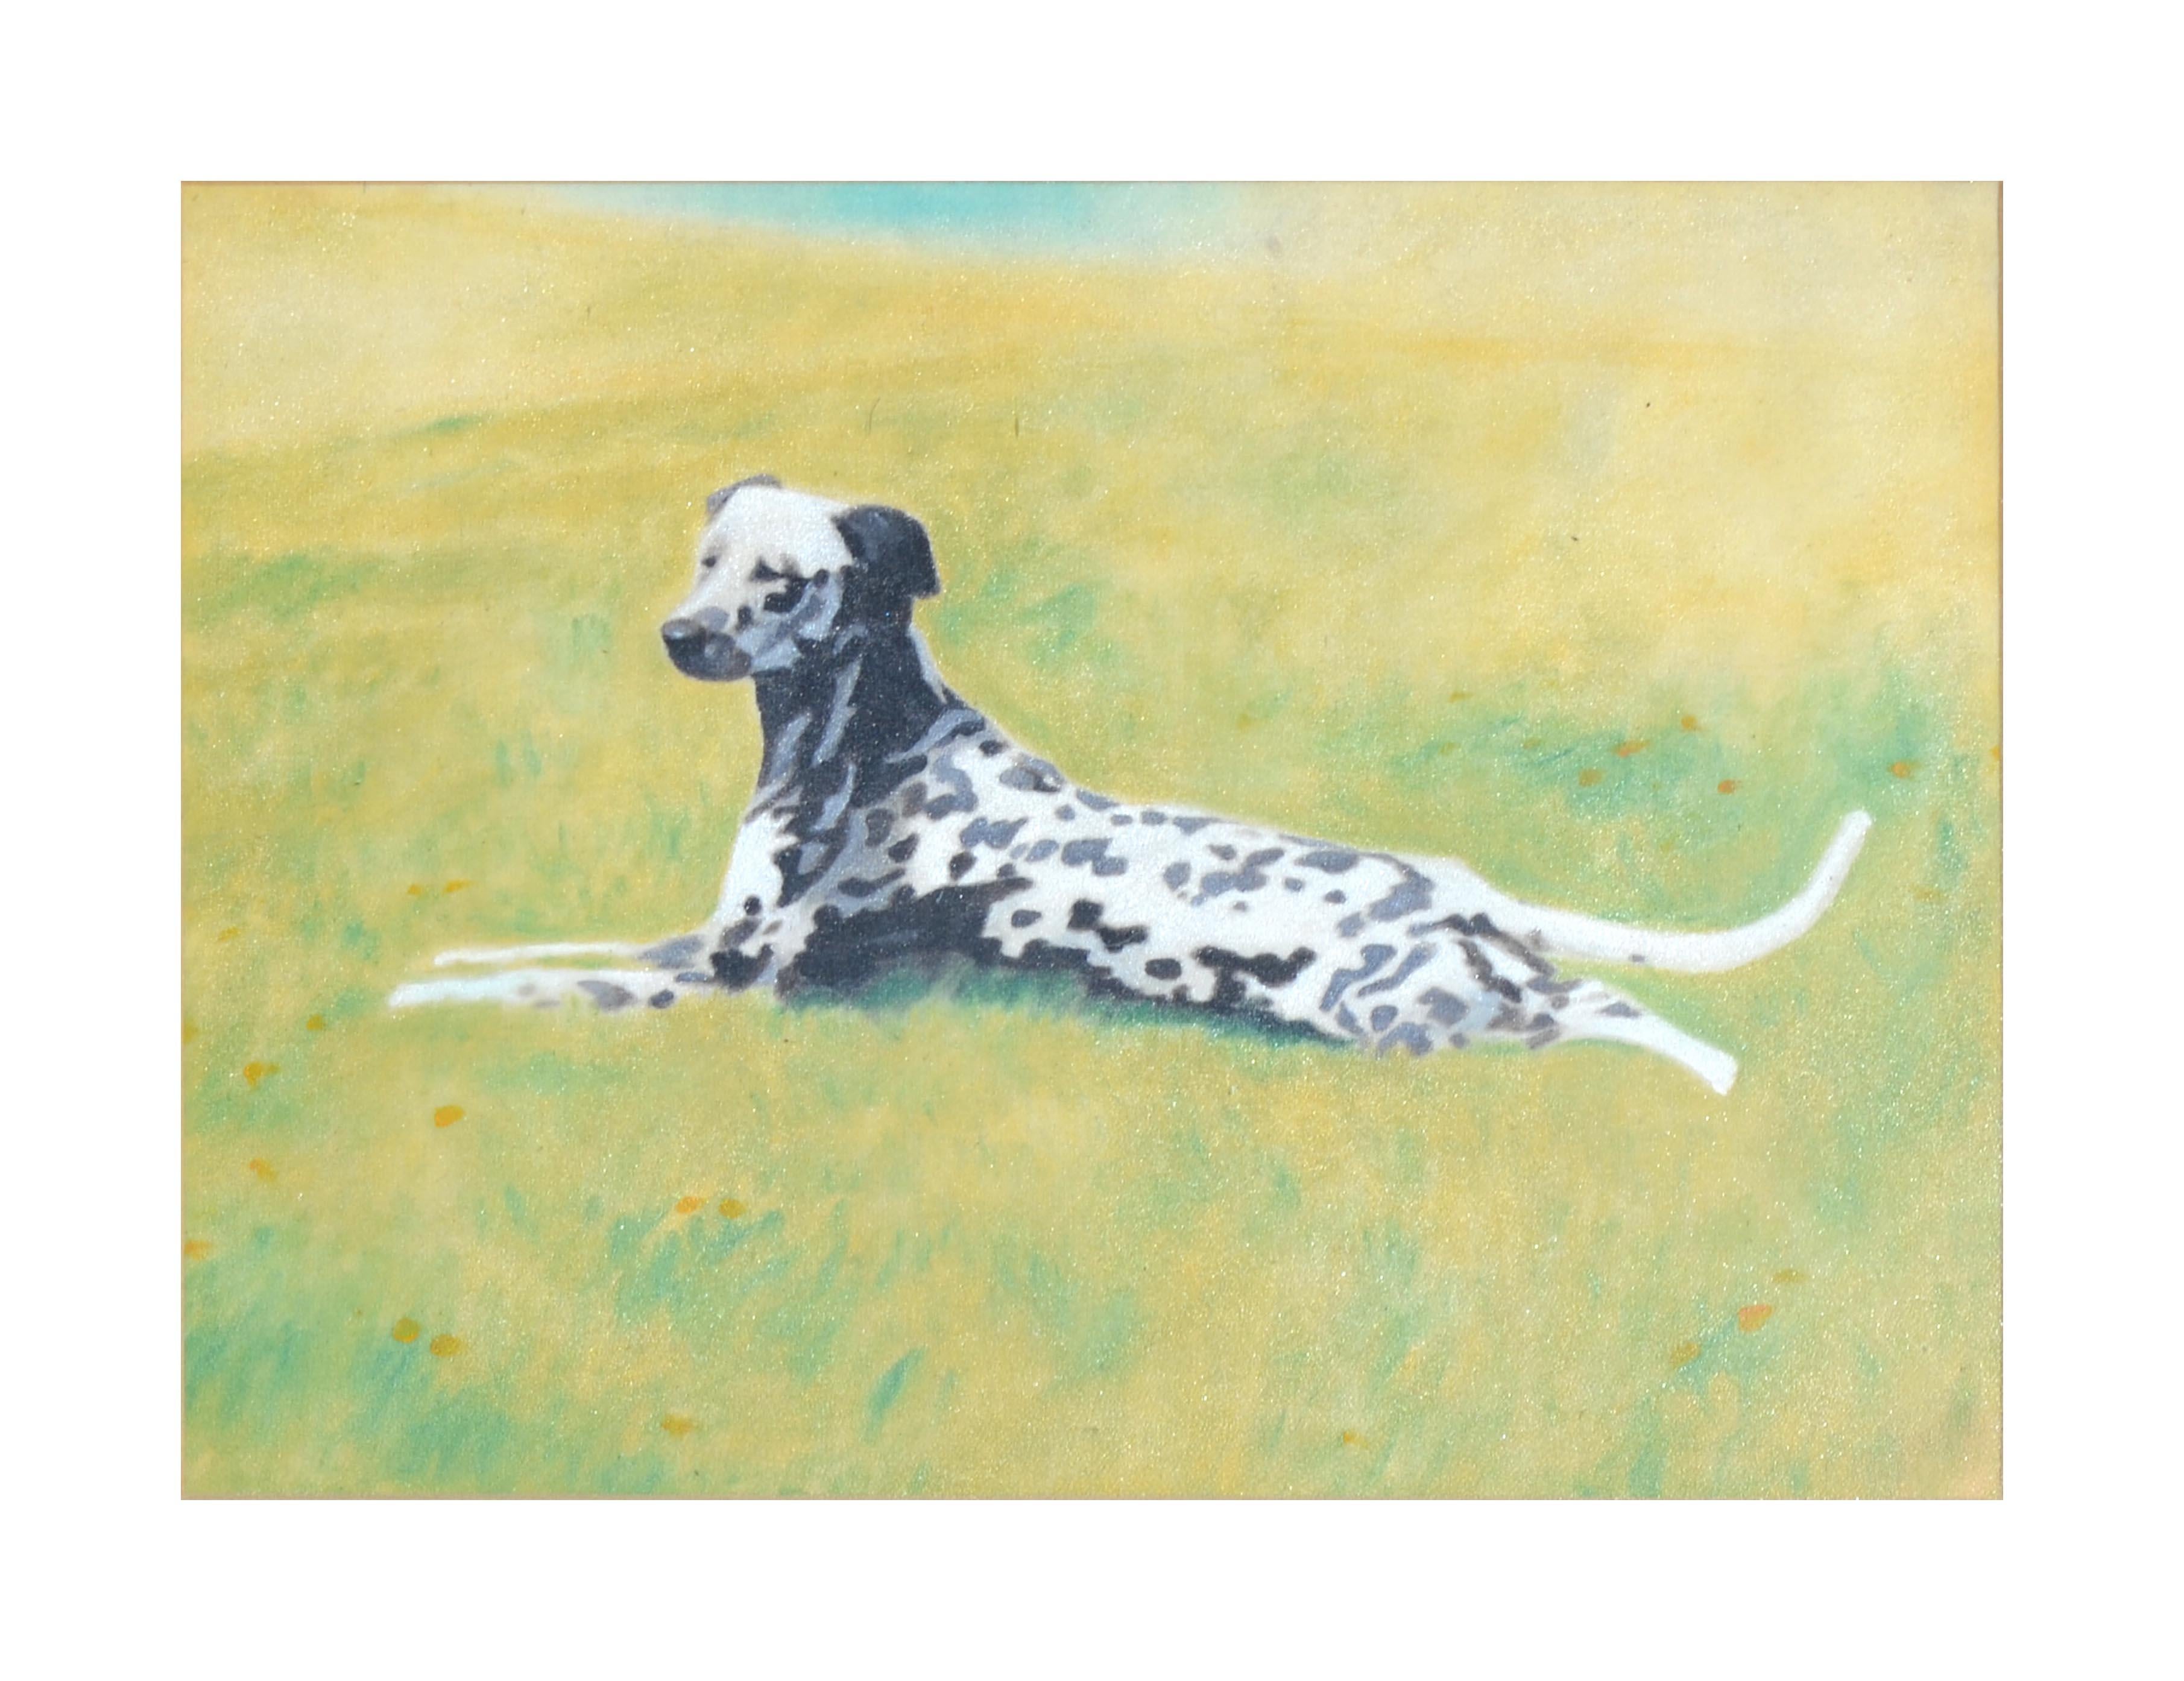 Dalmatian Dog In The Grass - Painting by Unknown